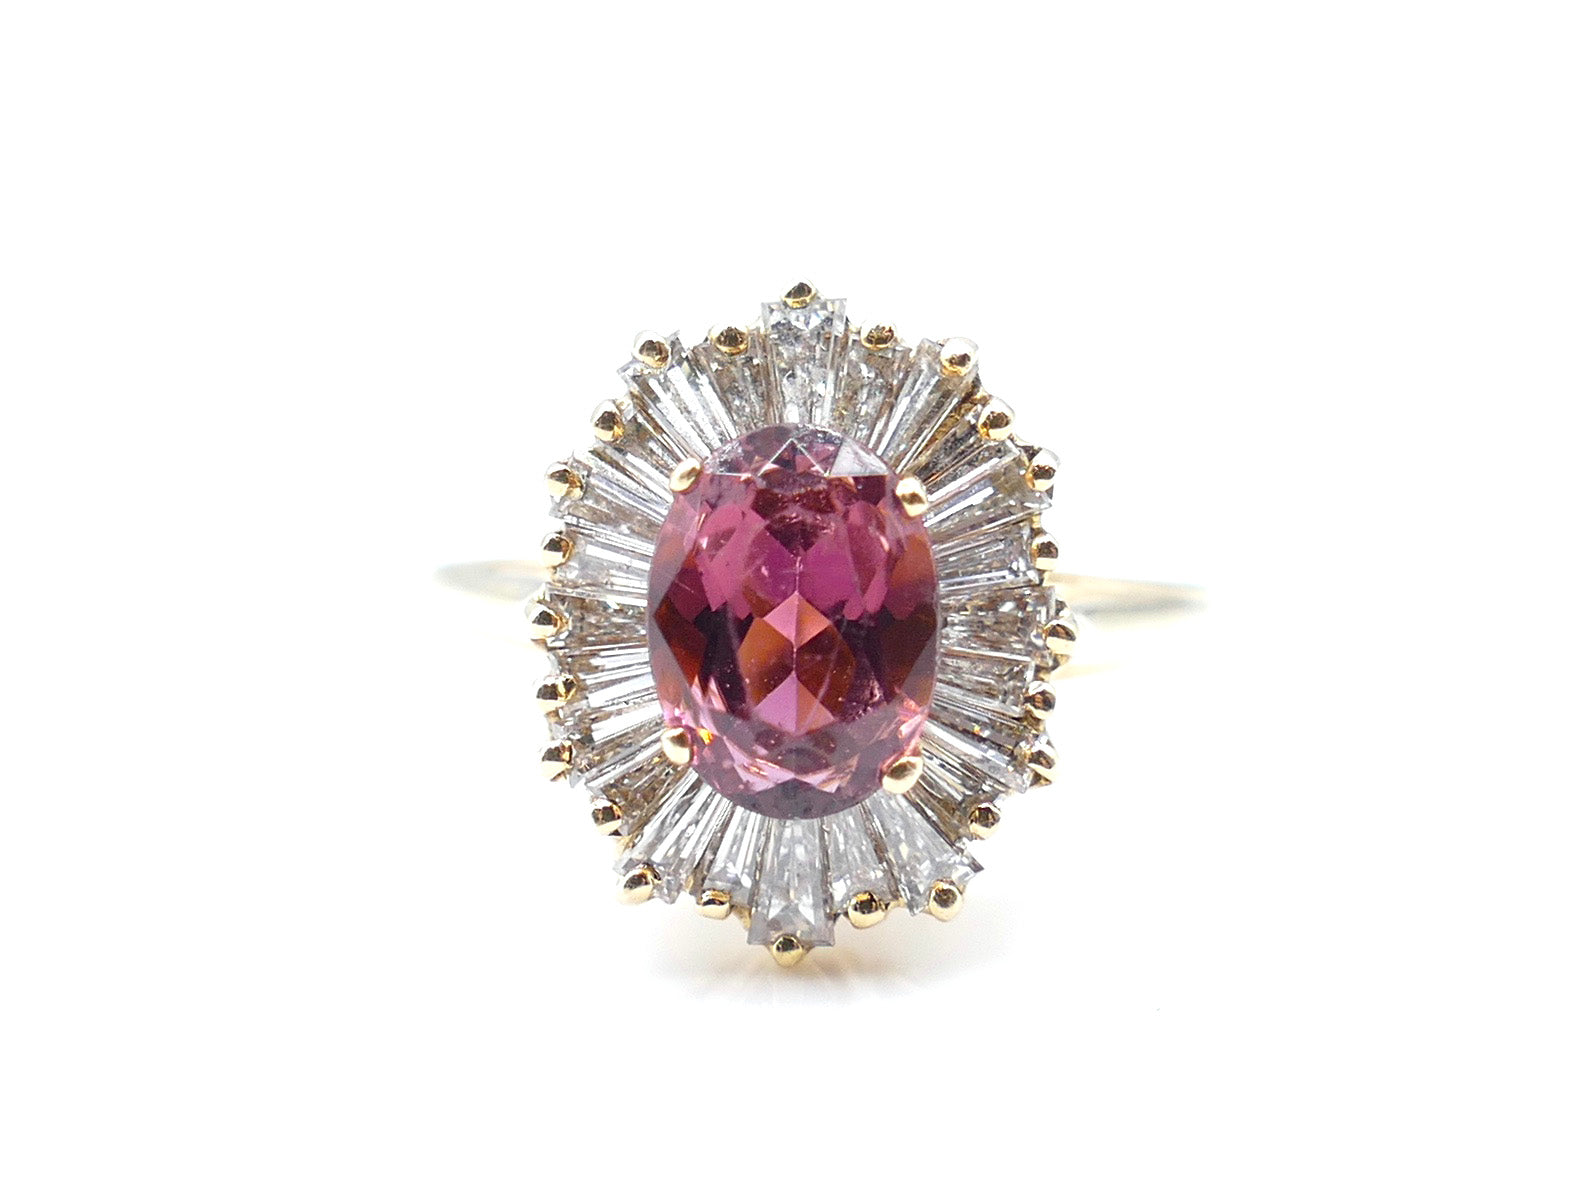 3 CT Pink Tourmaline and Diamond Baguette Ring